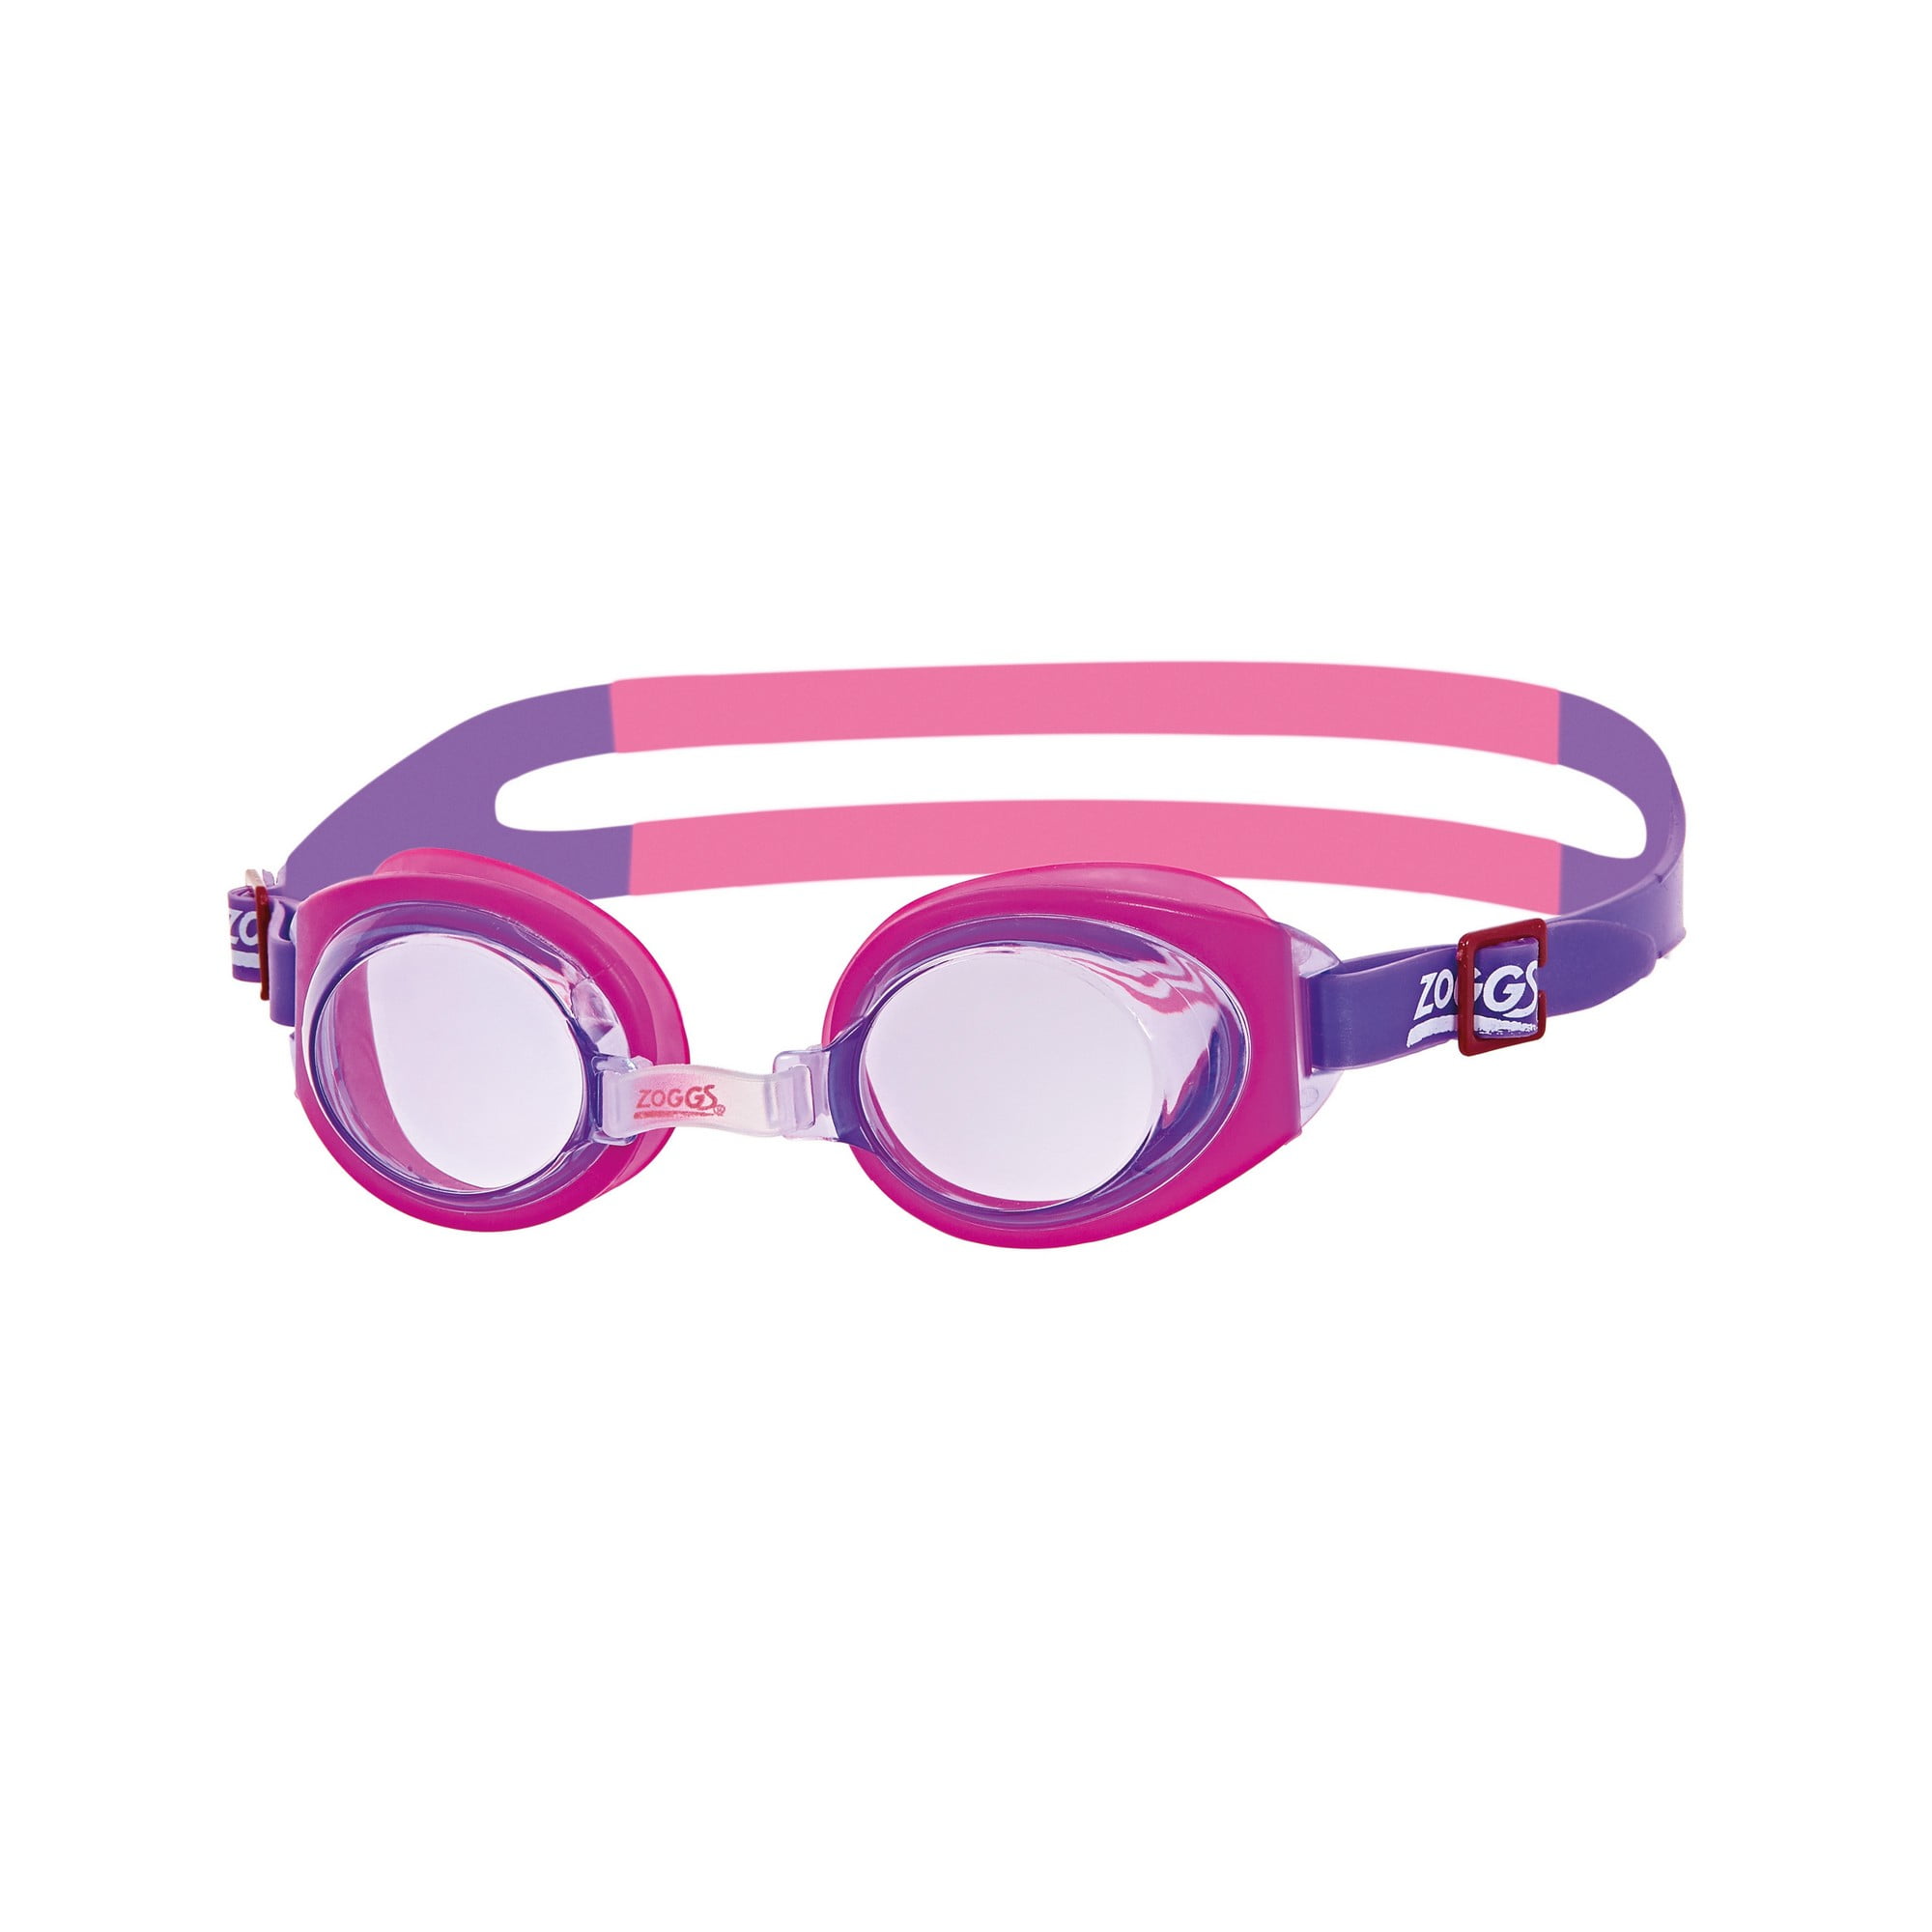 LITTLE SUPER SEAL GOGGLE PINK AND BLUE ZOGGS SWIMMING GOGGLES 0-6 YEARS 